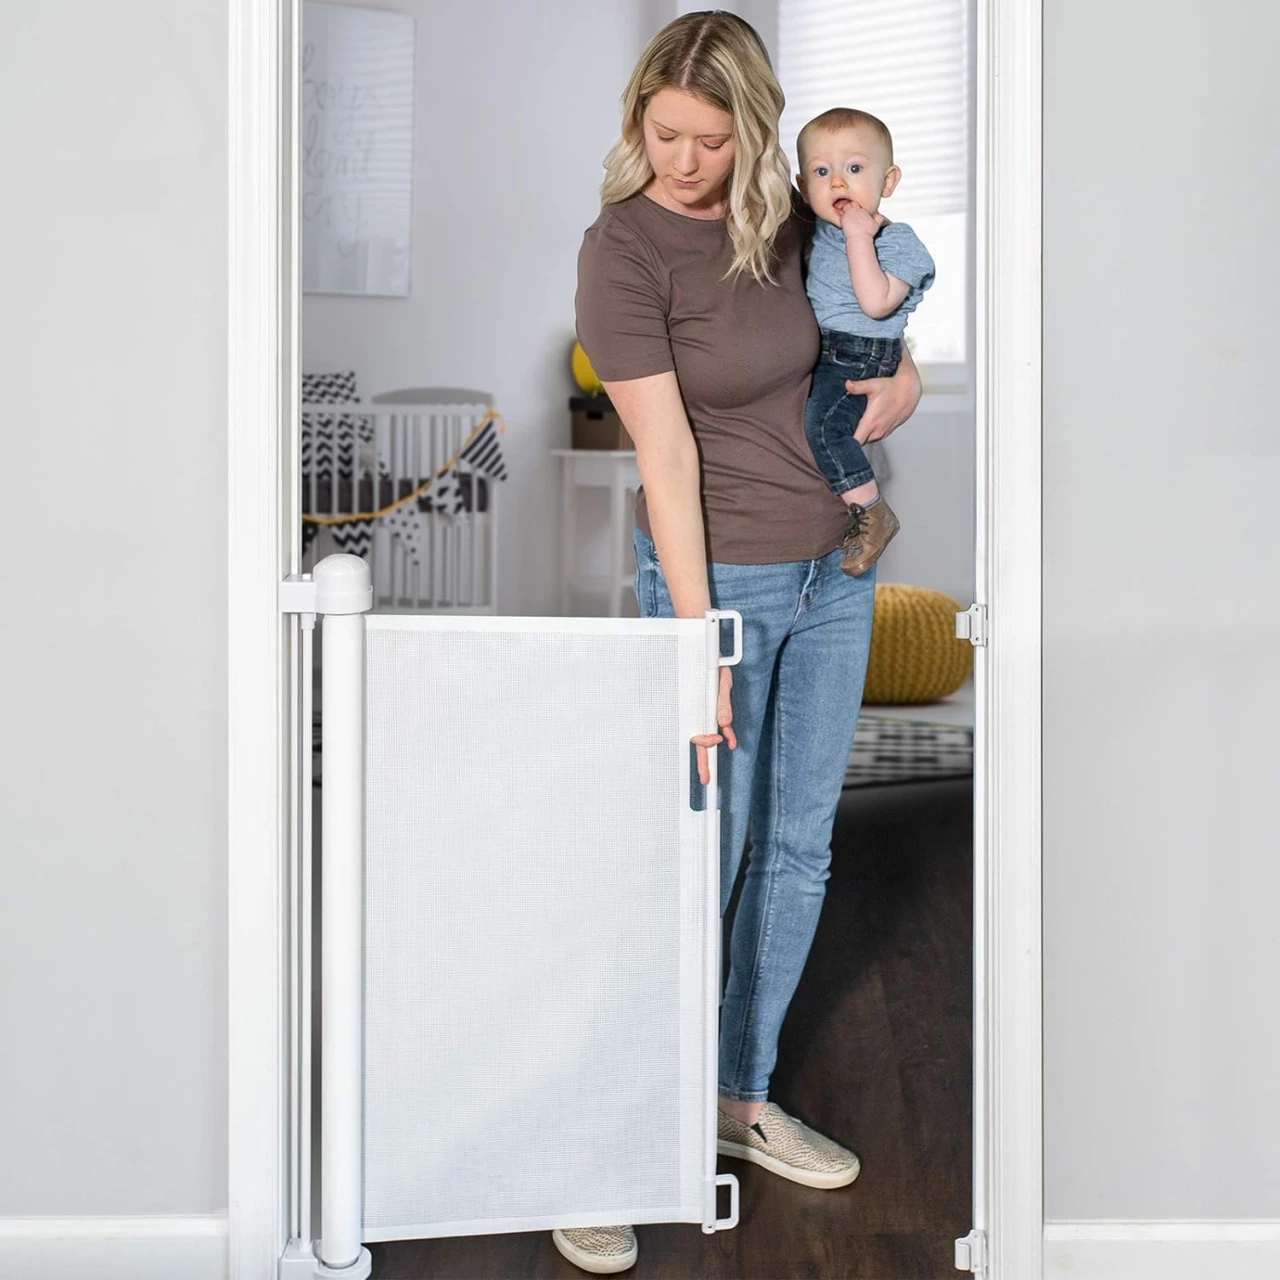 YOOFOR Retractable Baby Gate, Extra Wide Safety Kids or Pets Gate, 33” Tall, Extends to 55” Wide, Mesh Safety Dog Gate for Stairs, Indoor, Outdoor, Doorways, Hallways (White, 33&quot;x55&quot;)